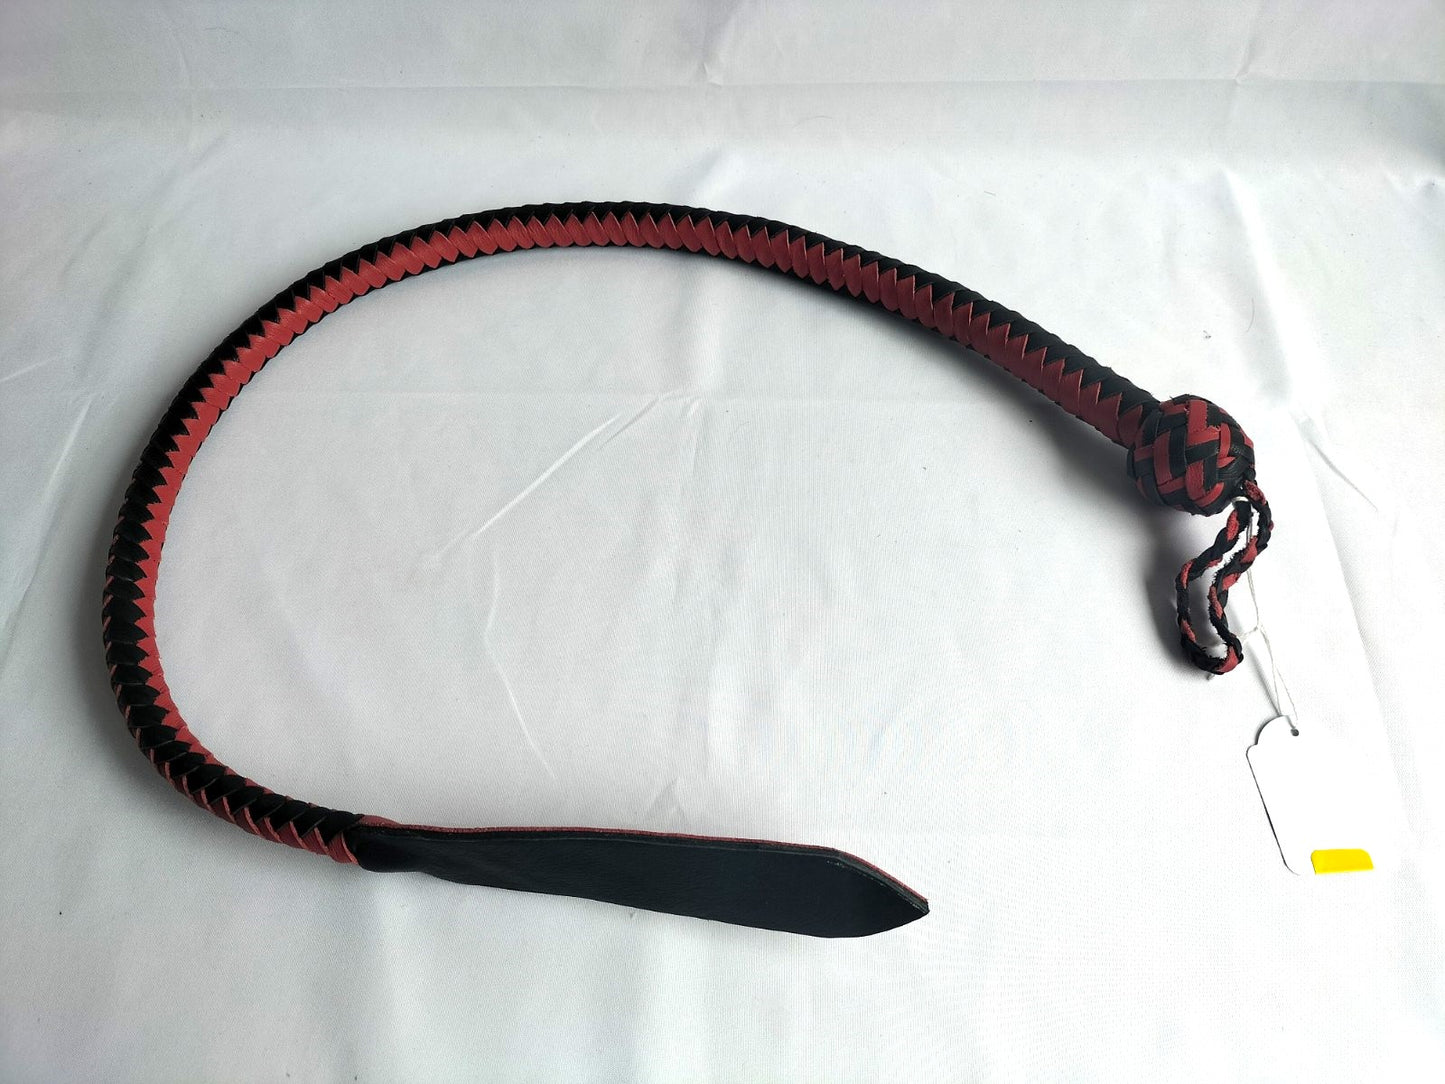 Snake whip with large flap at the end (black)